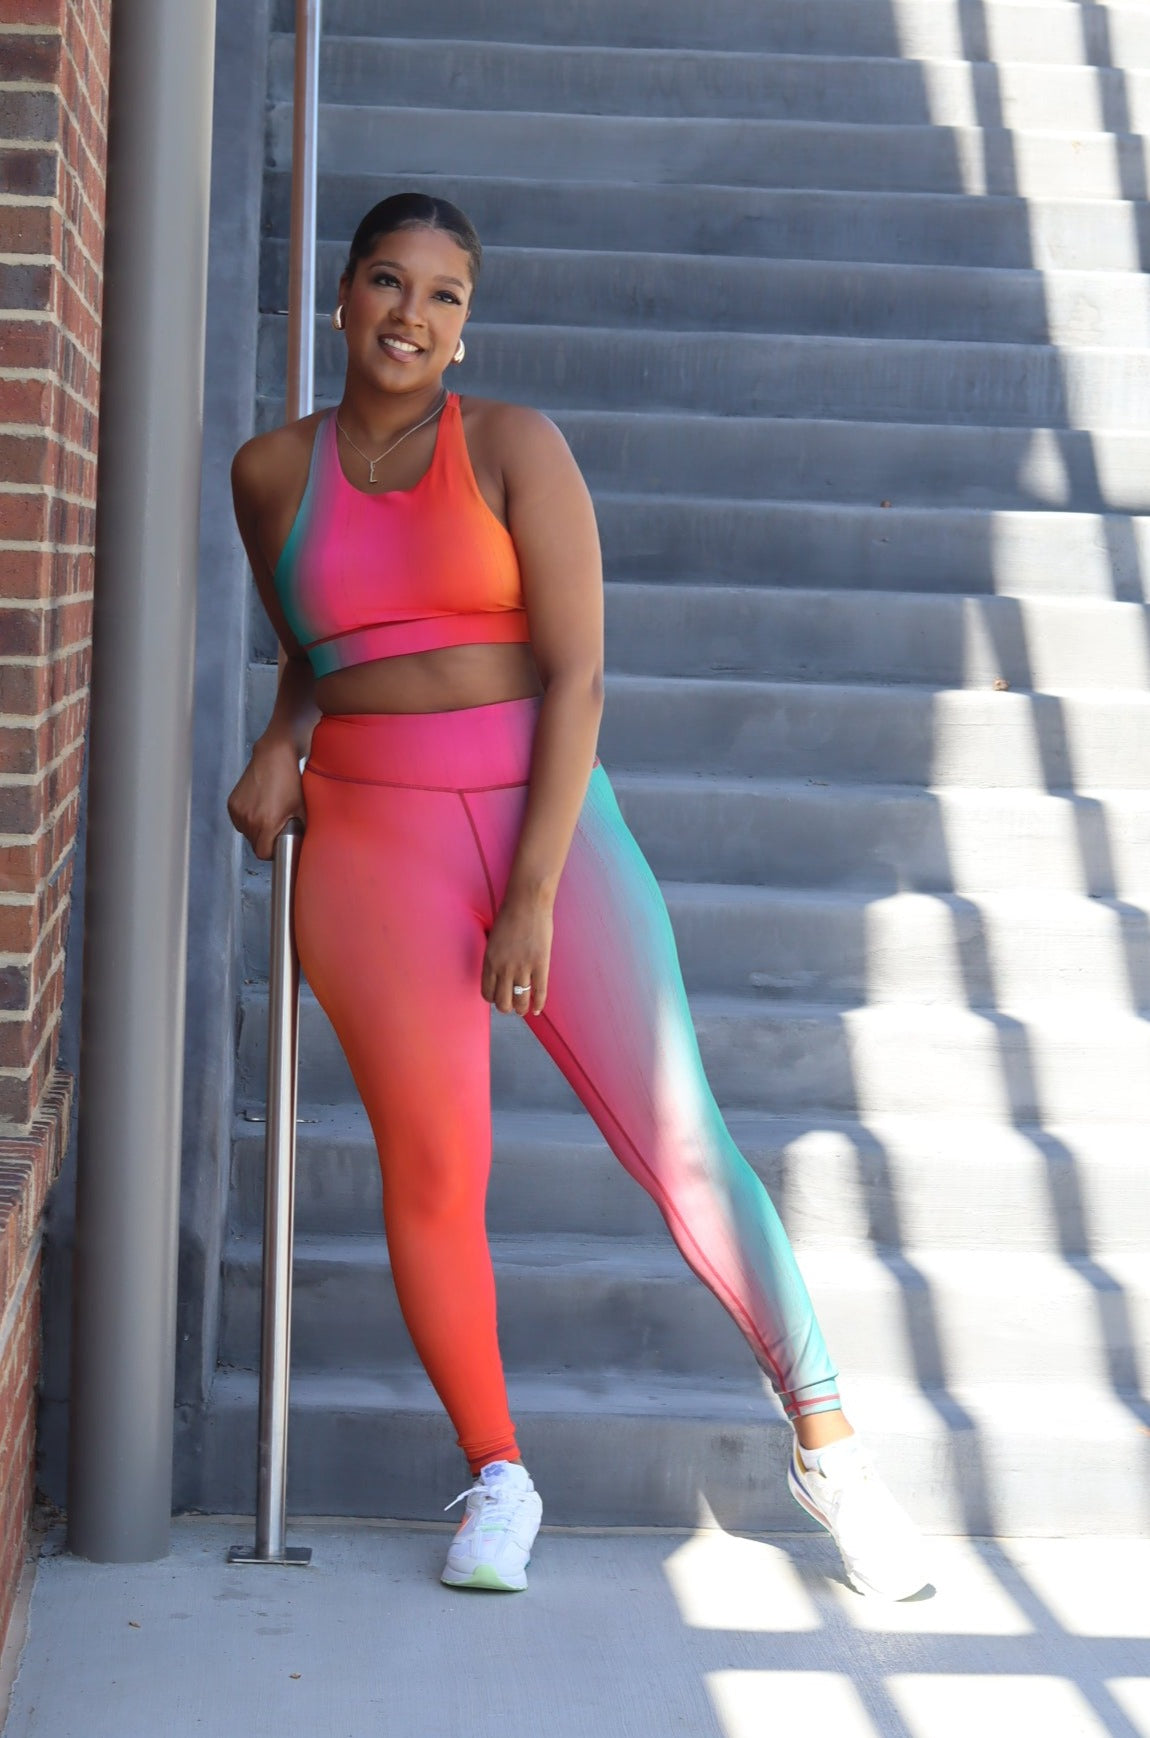 The Perfect Sculpt Activewear - #CurrentlyObsessedWith — JoJo the CEO